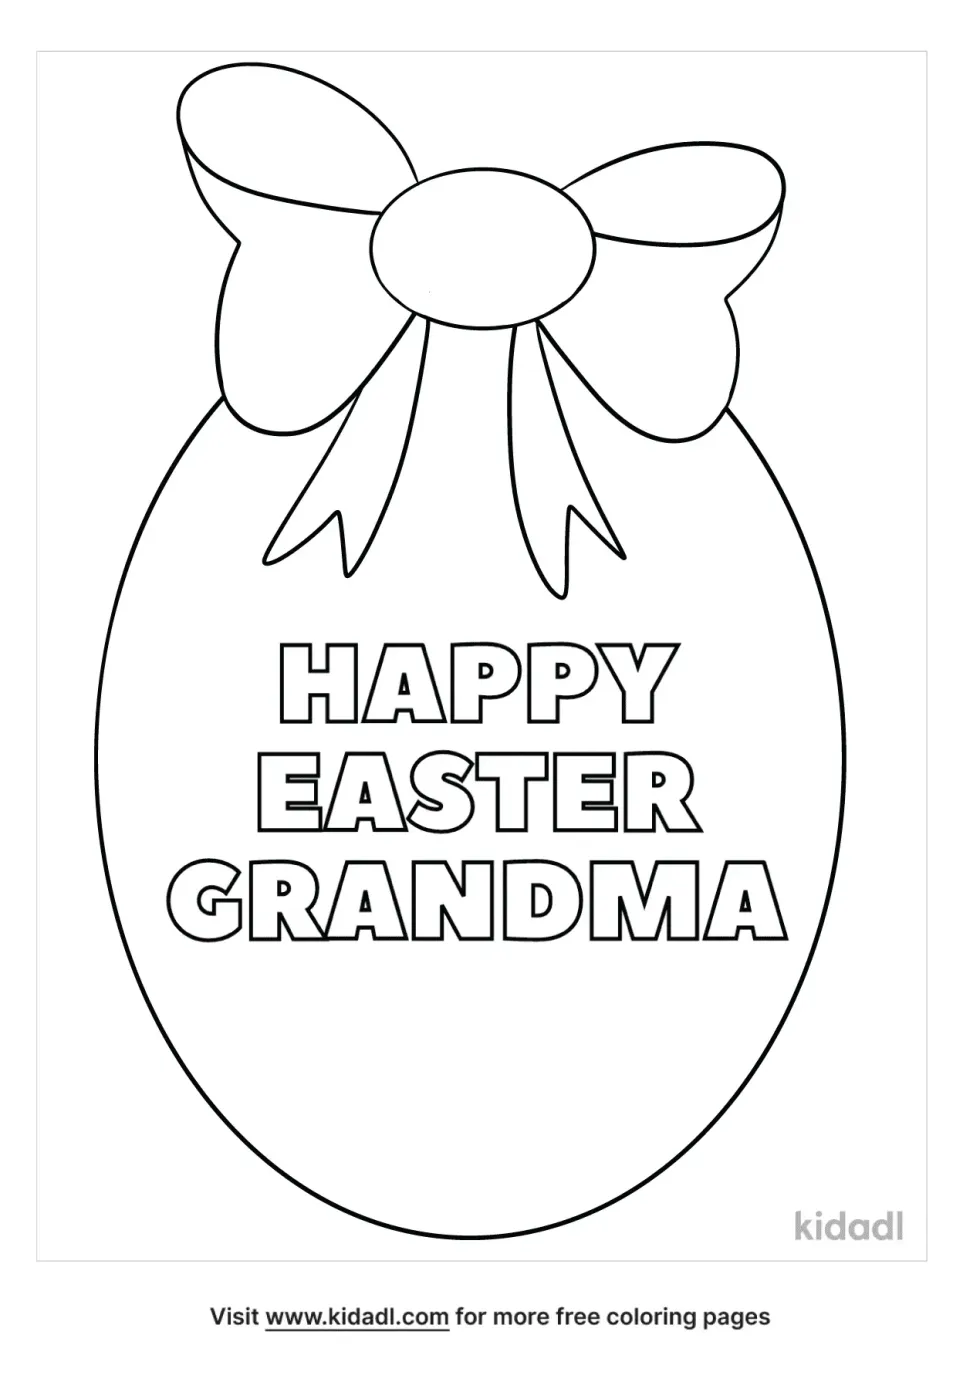 Happy Easter Grandma Coloring Page